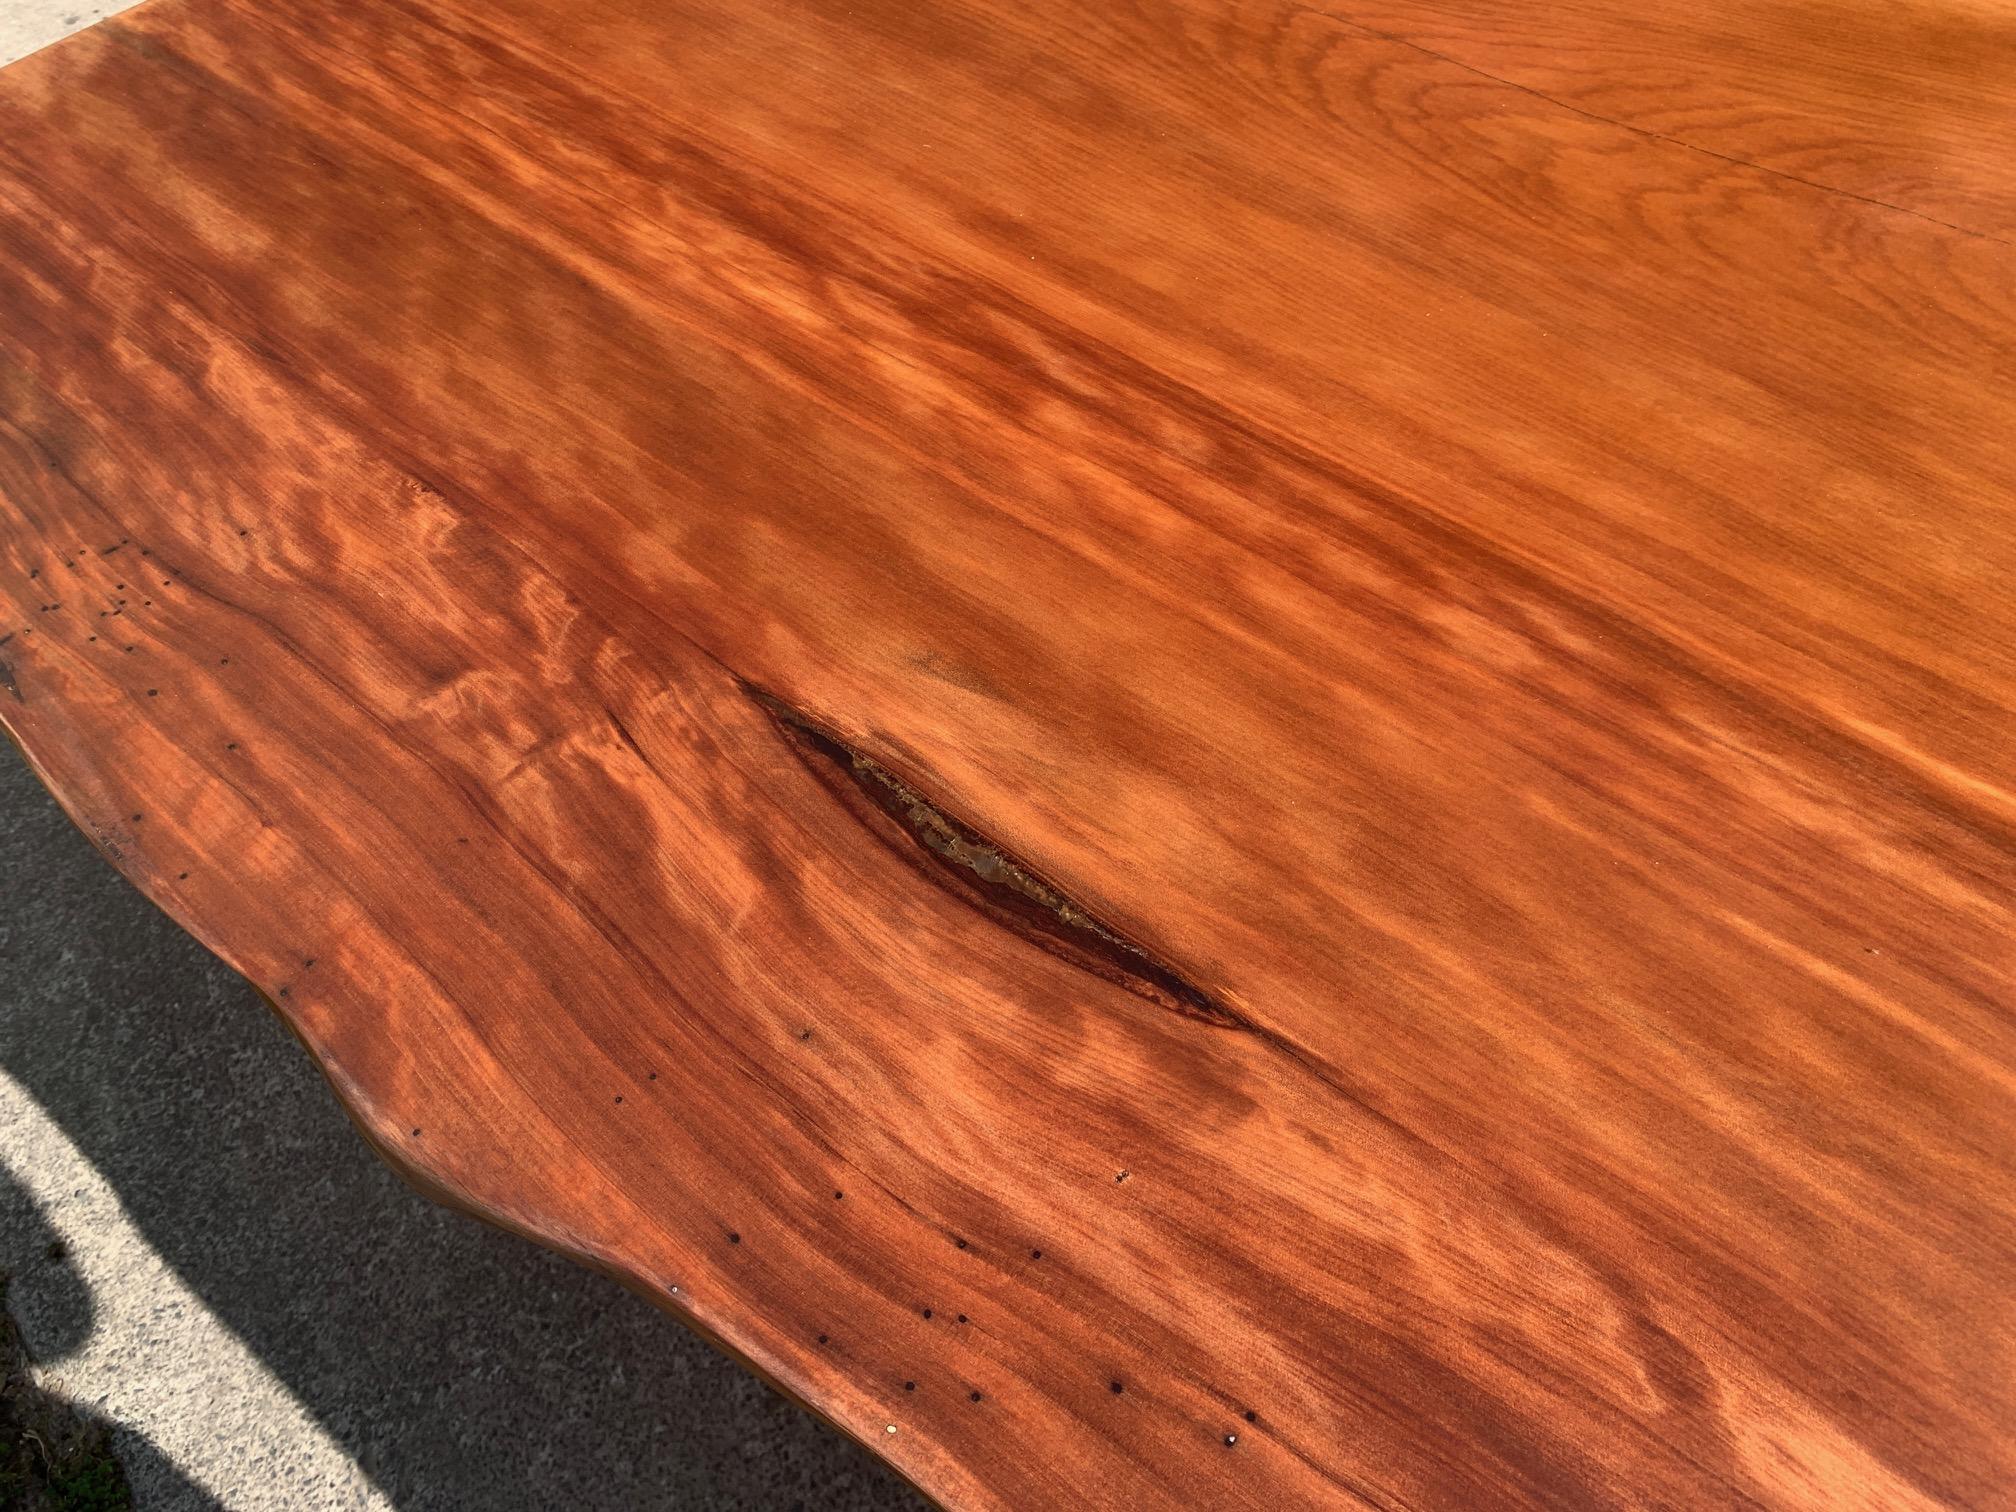 Modern Kauri dining table made from solid Ancient Swamp Kauri wood.

A live edge Kauri dining table made from New Zealand 50,000-year-old Ancient Swamp Kauri. Hand-crafted in Auckland, New Zealand from a single piece of Ancient Swamp Kauri. The